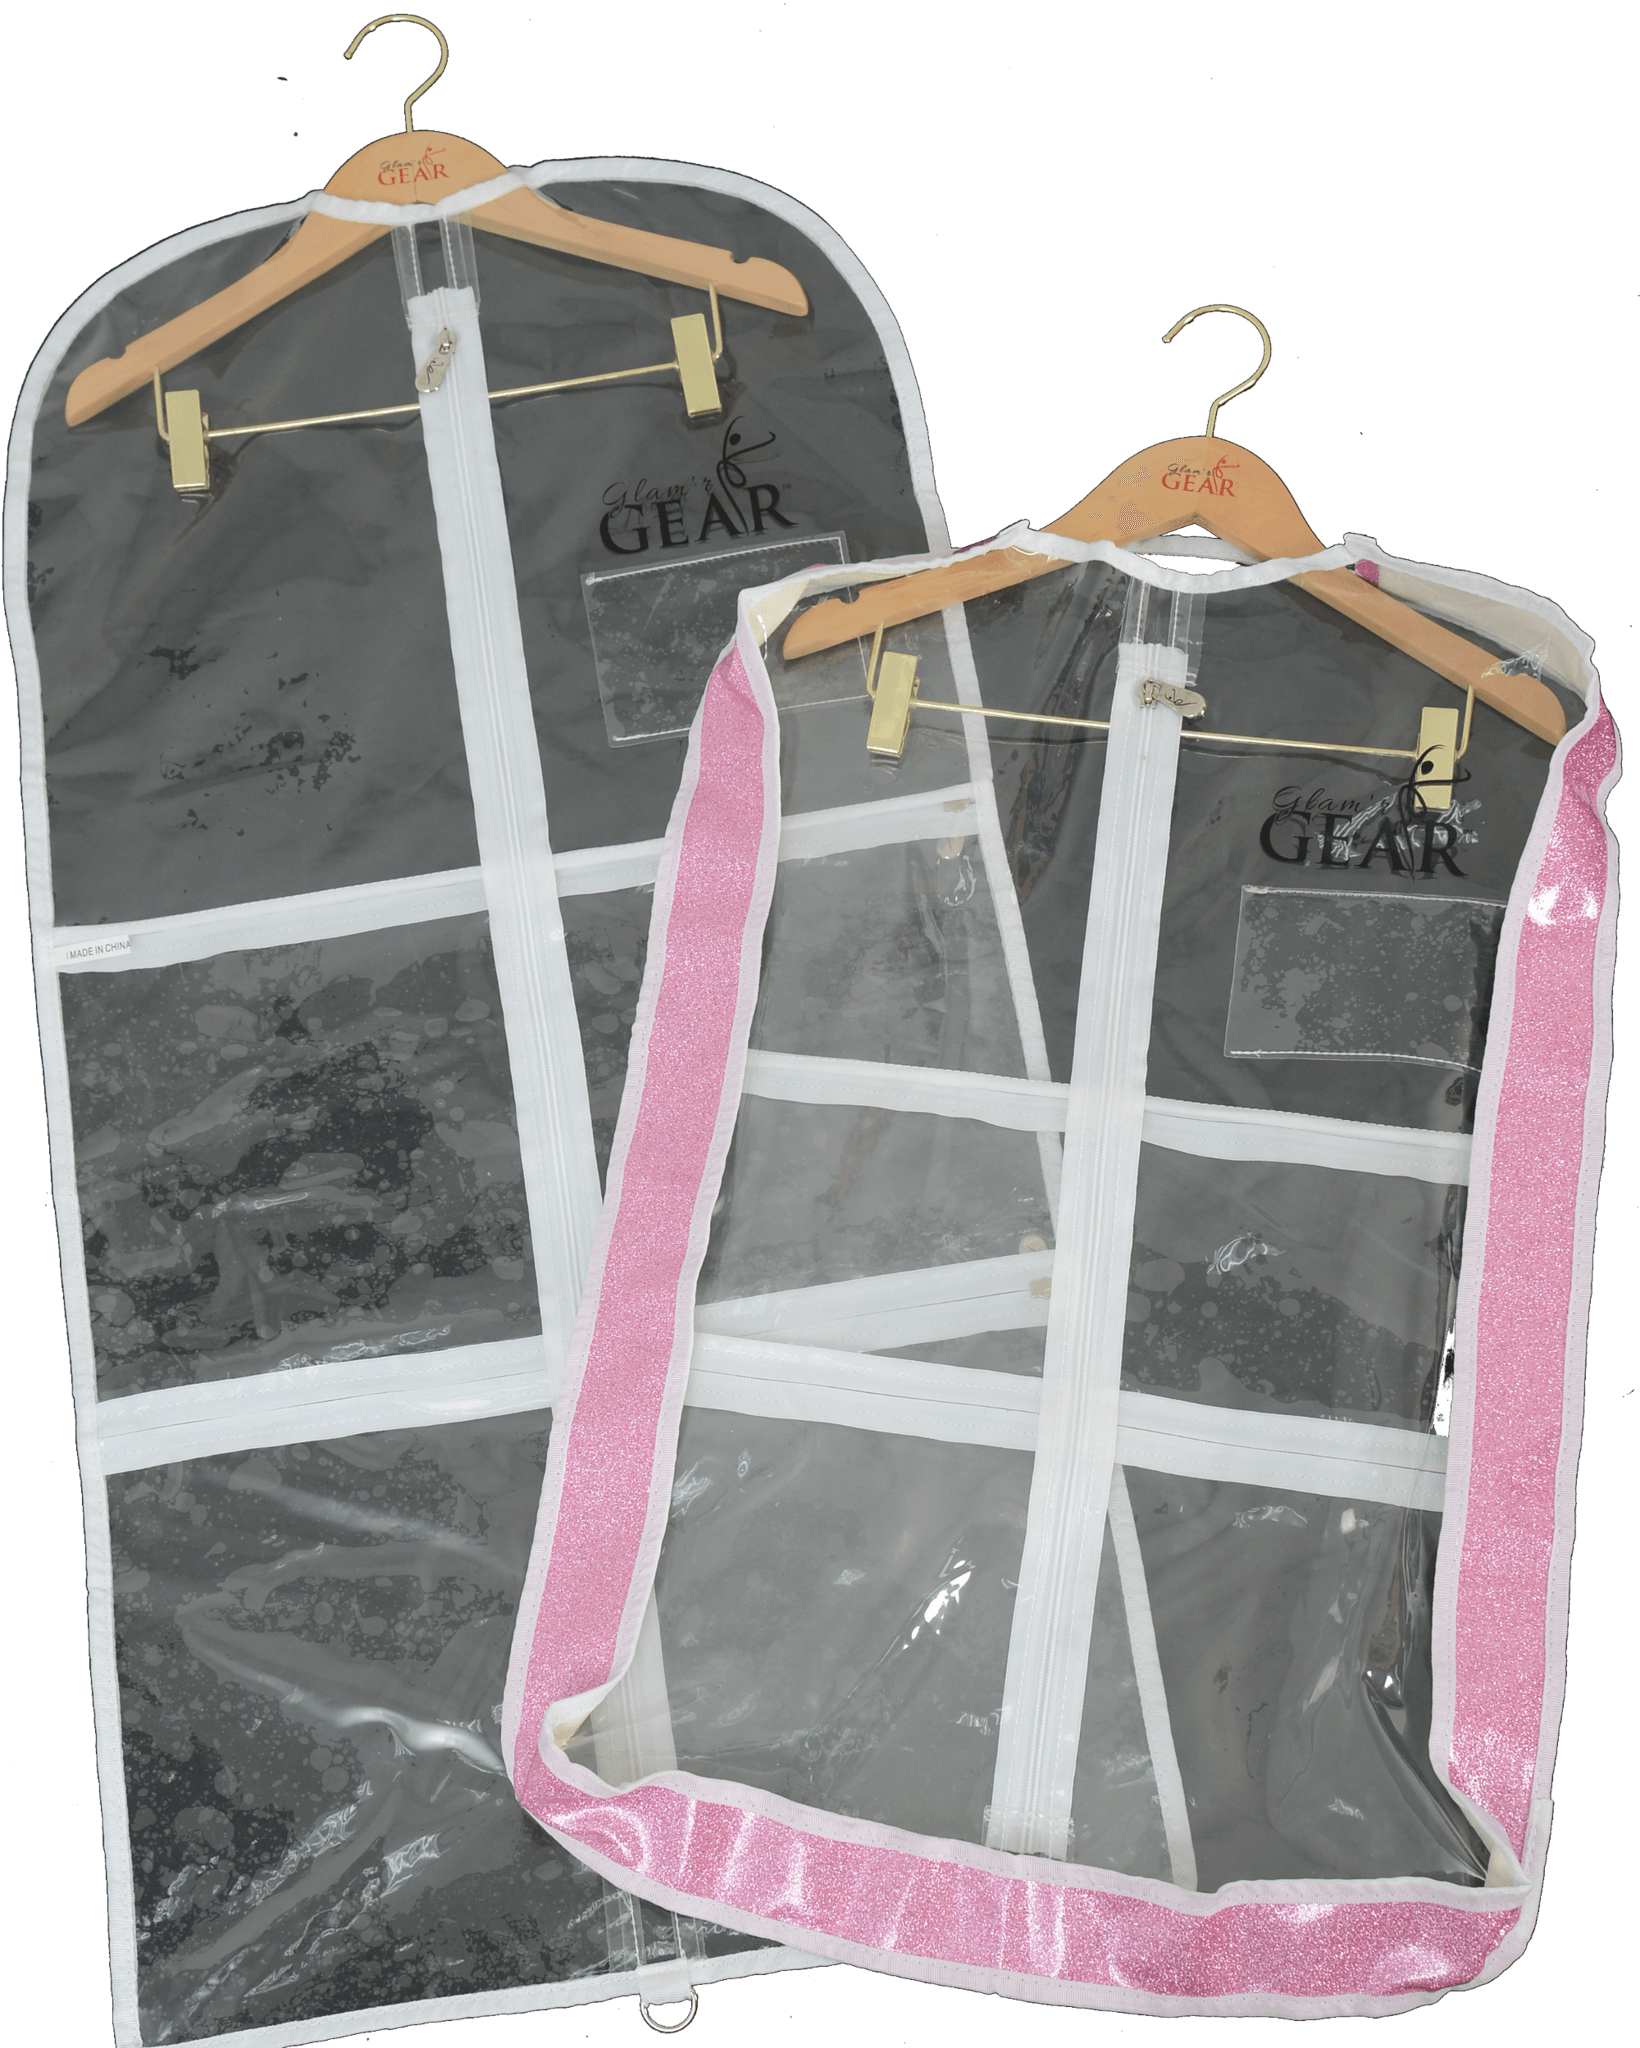 Qchengsan Garment Bags for Hanging Clothes, Garment Bags for Travel  Storage, Dance Garment Bags, Moving Bags for Clothes, Garment Bag Cover,  Suit Bag